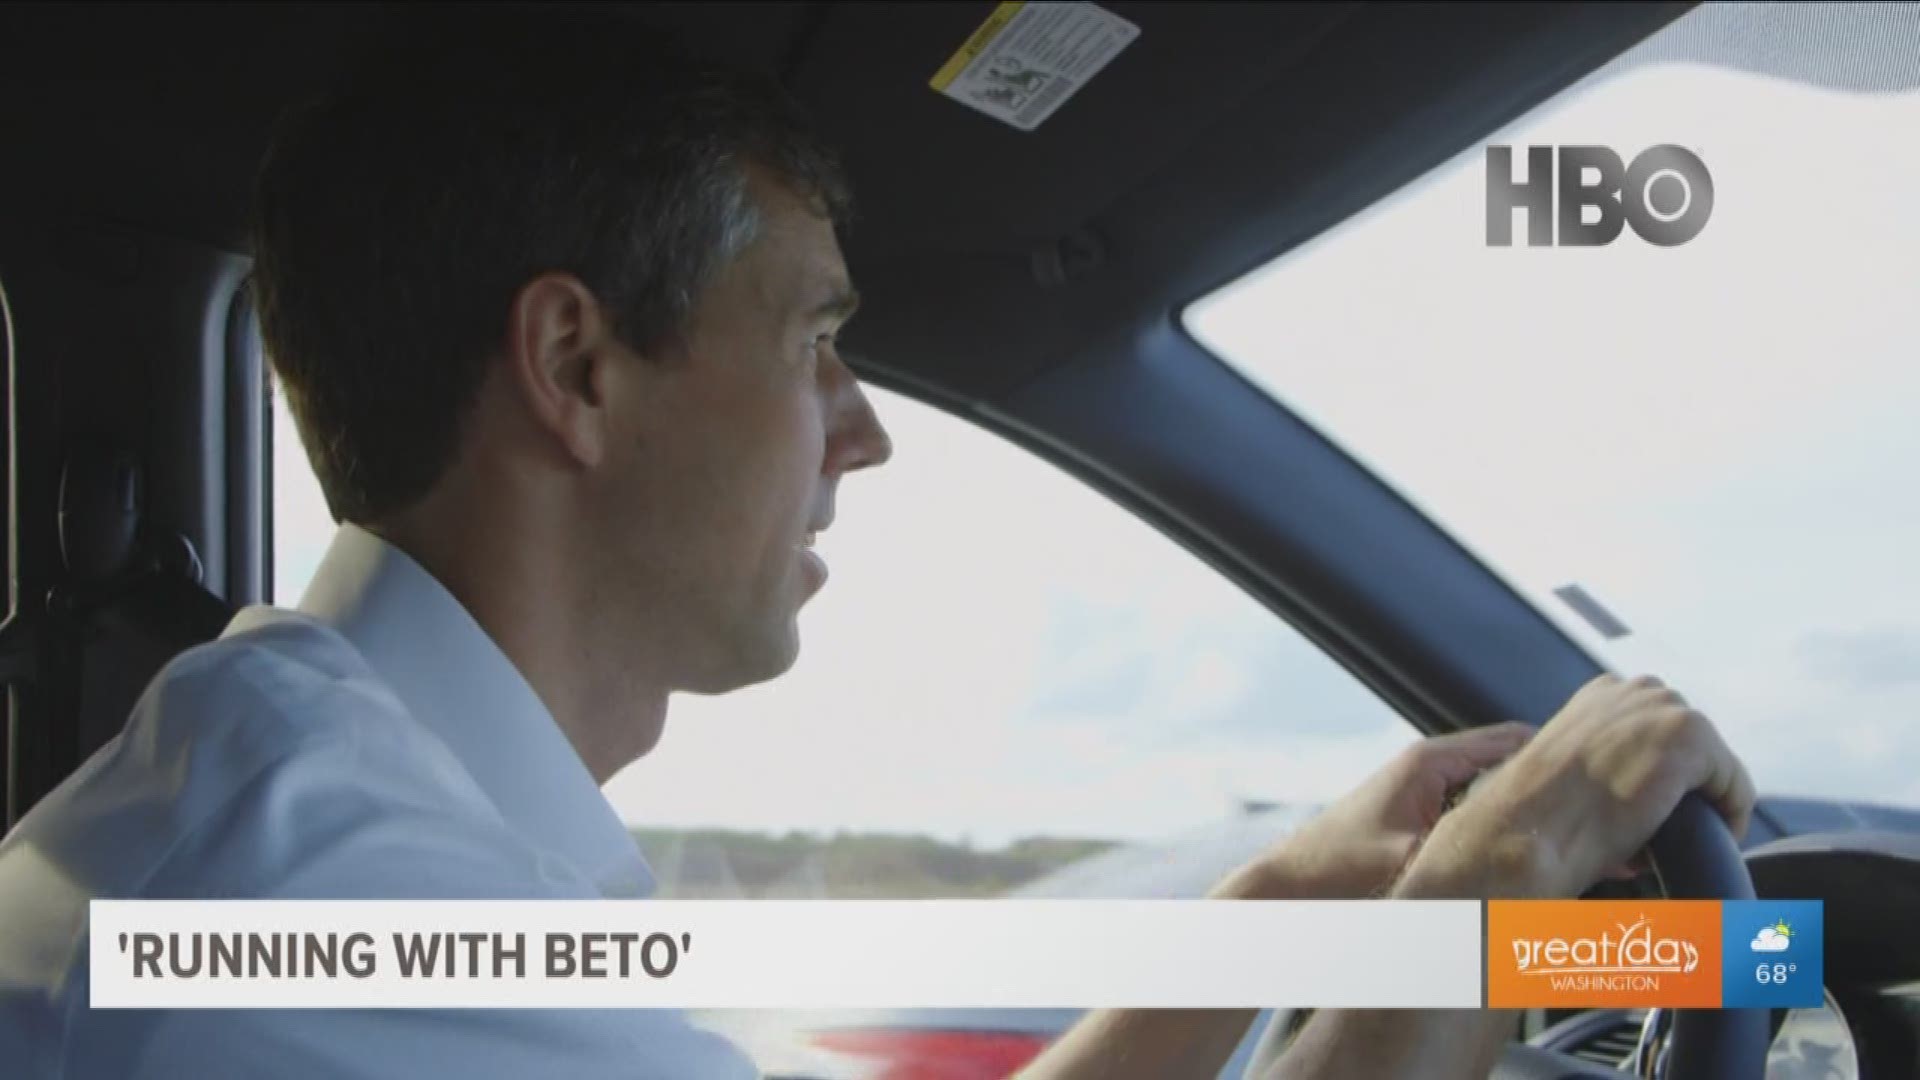 The new HBO documentary 'Running with Beto' takes a special look at the grassroots campaign Texas Congressman Beto O'Rourke (D-TX) undertook while trying to defeat Sen. Ted Cruz (R-TX).